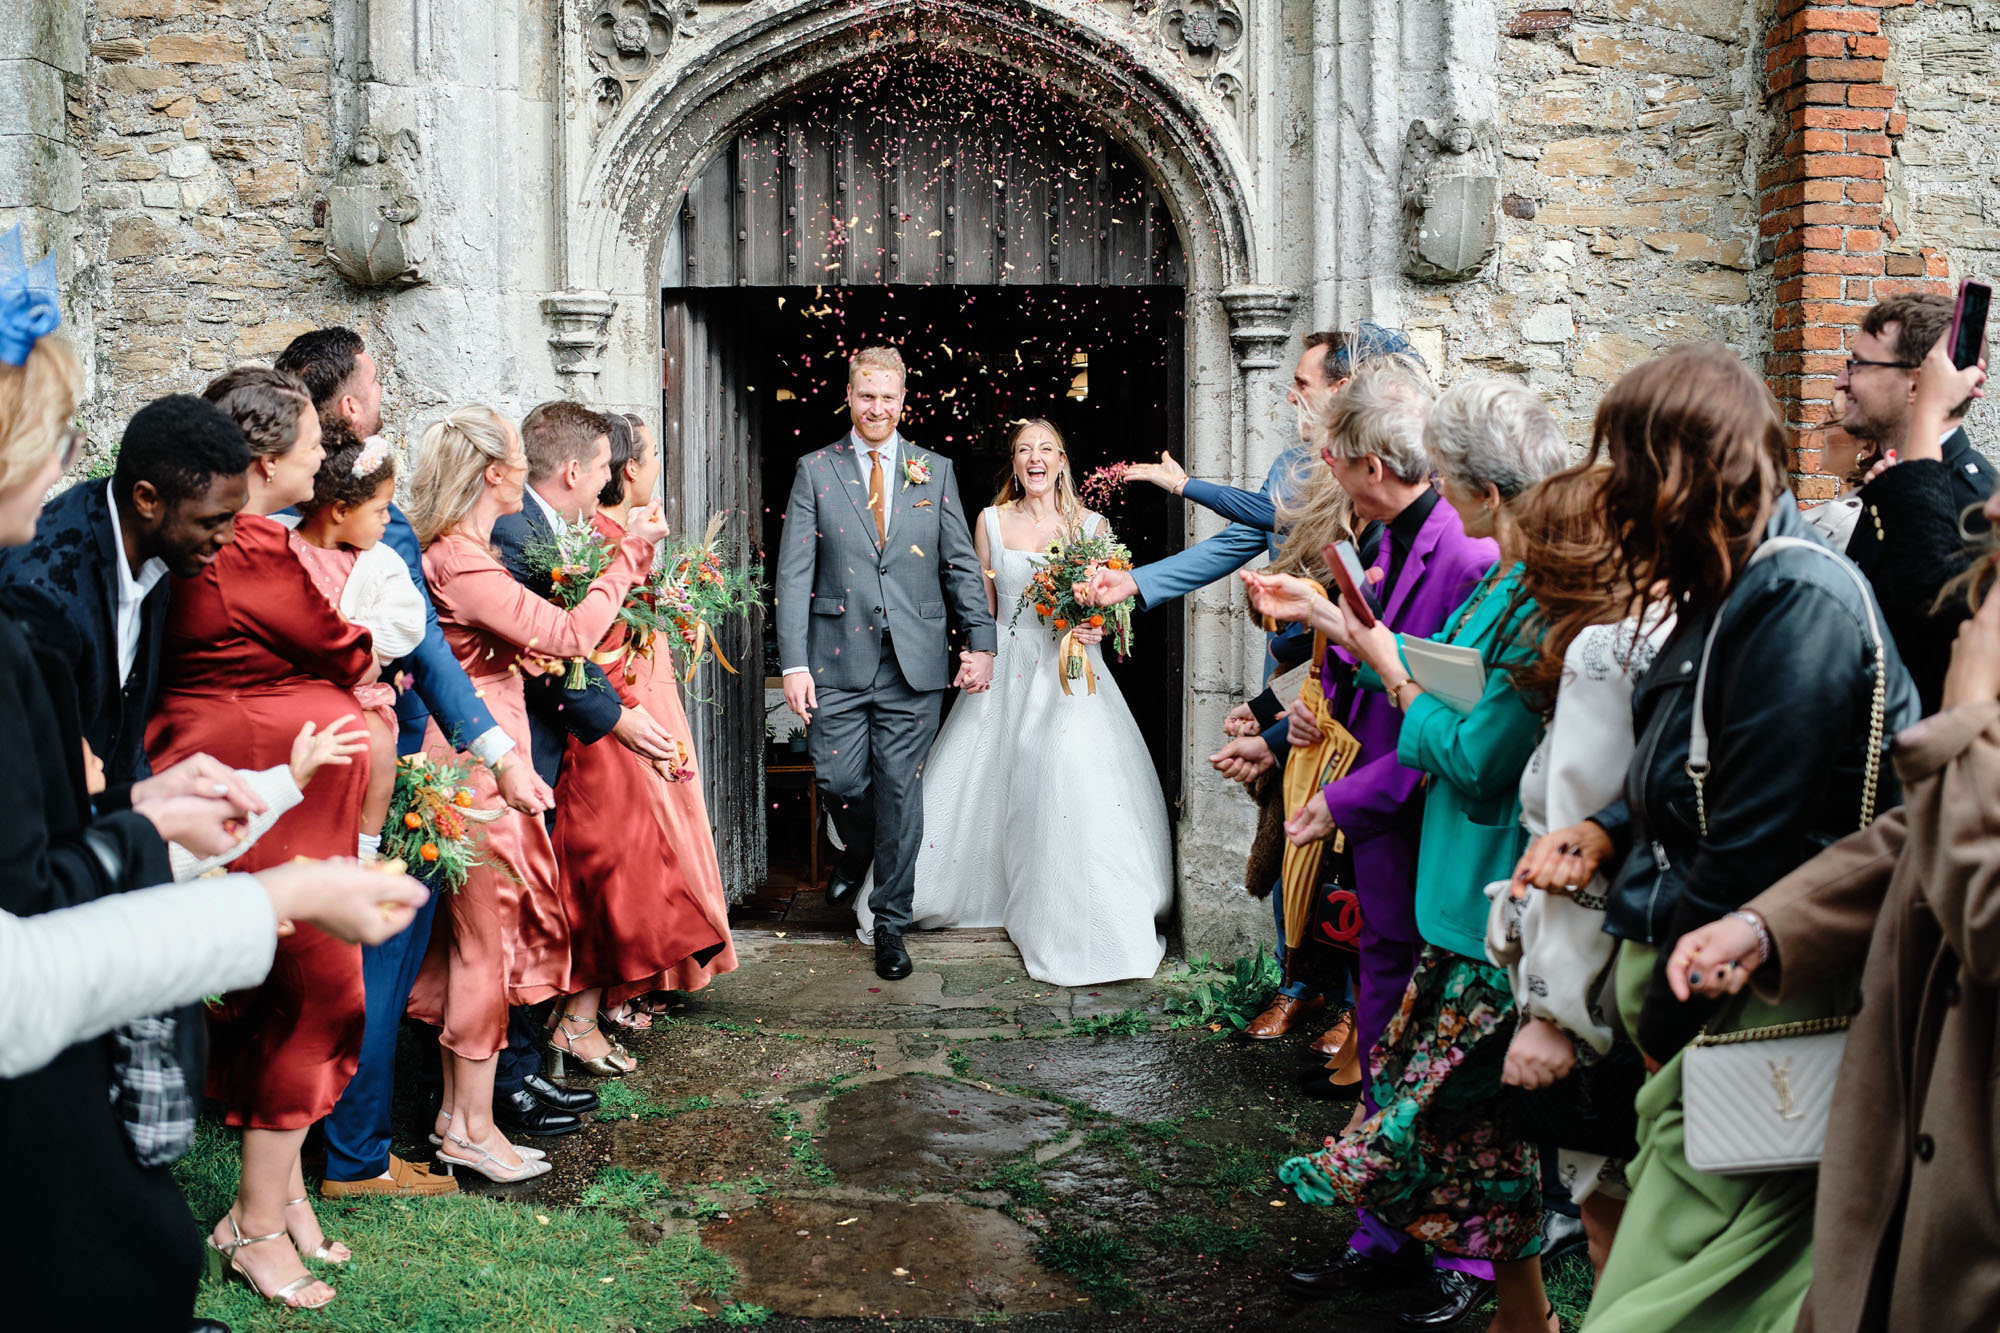 Groom and bride leaving the wedding as guests throw confetti. By Howling Bassett Photography